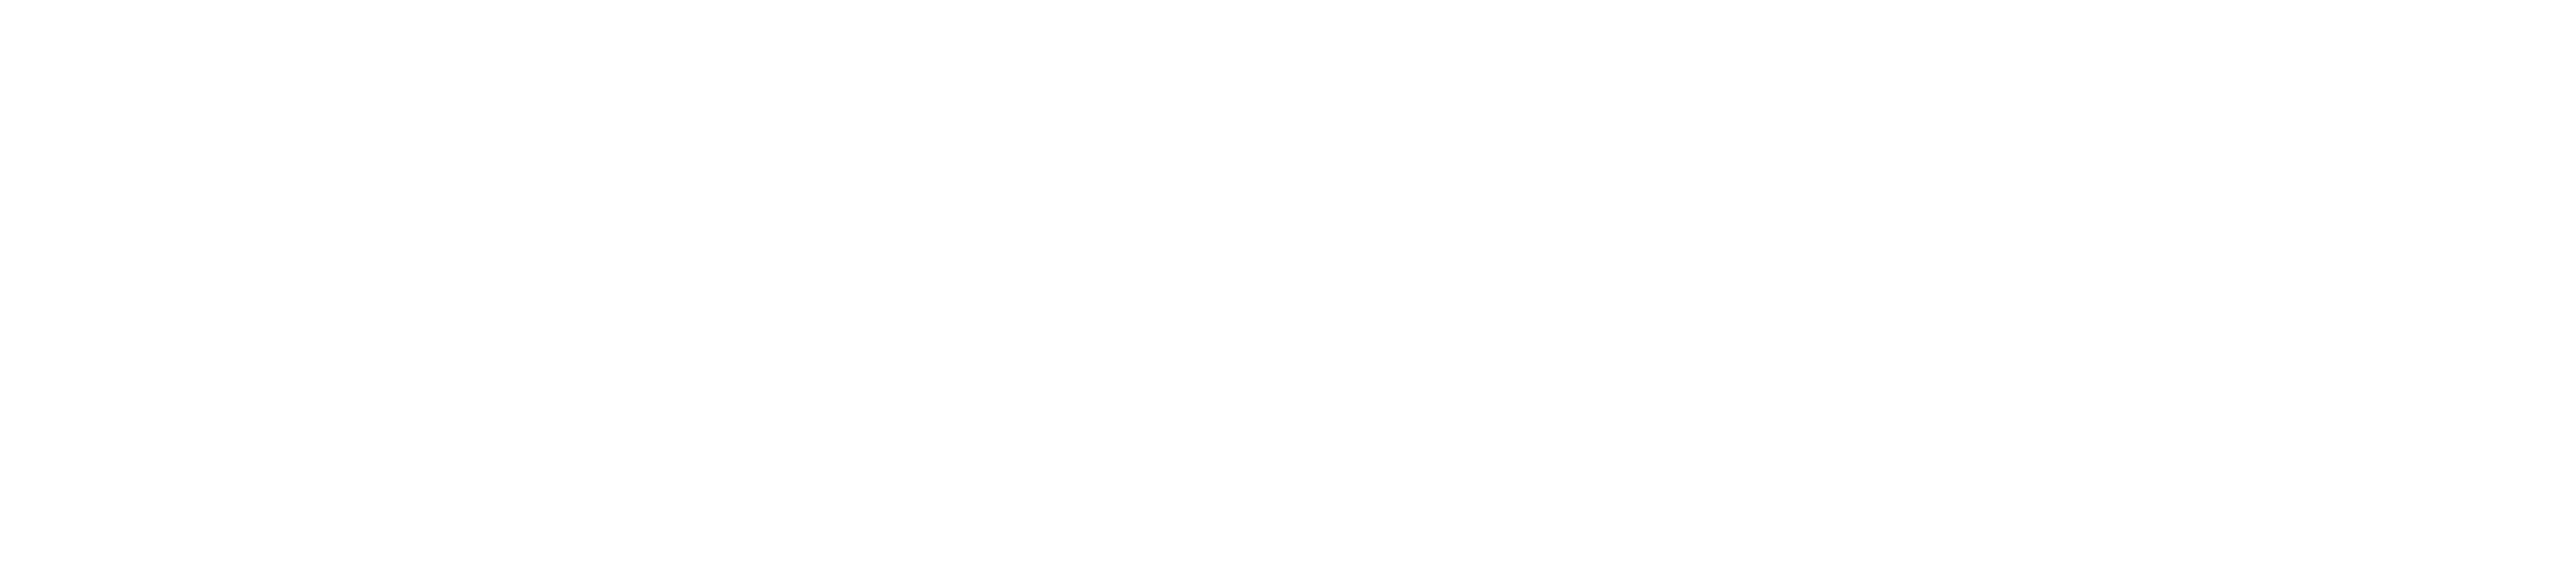 Caleche project EU co-funded